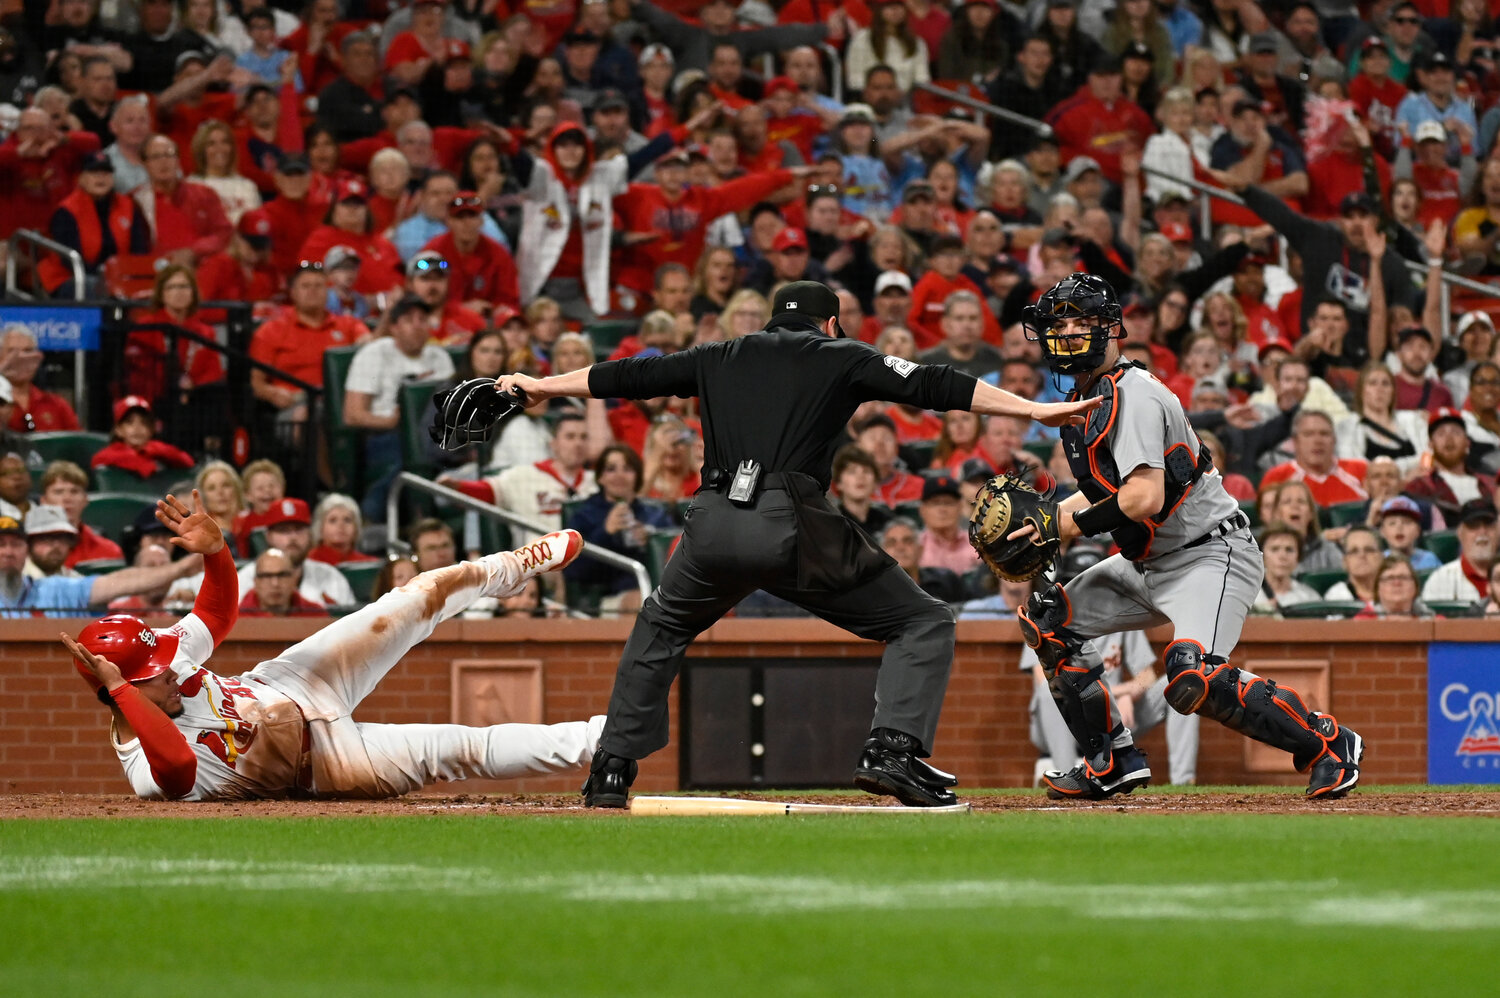 St. Louis Cardinals' Willson Contreras (left) is safe at home plate as Detroit Tigers catcher Jake Rogers looks on during the fourth inning of their game Friday night in St. Louis. (AP Photo/Jeff Le)